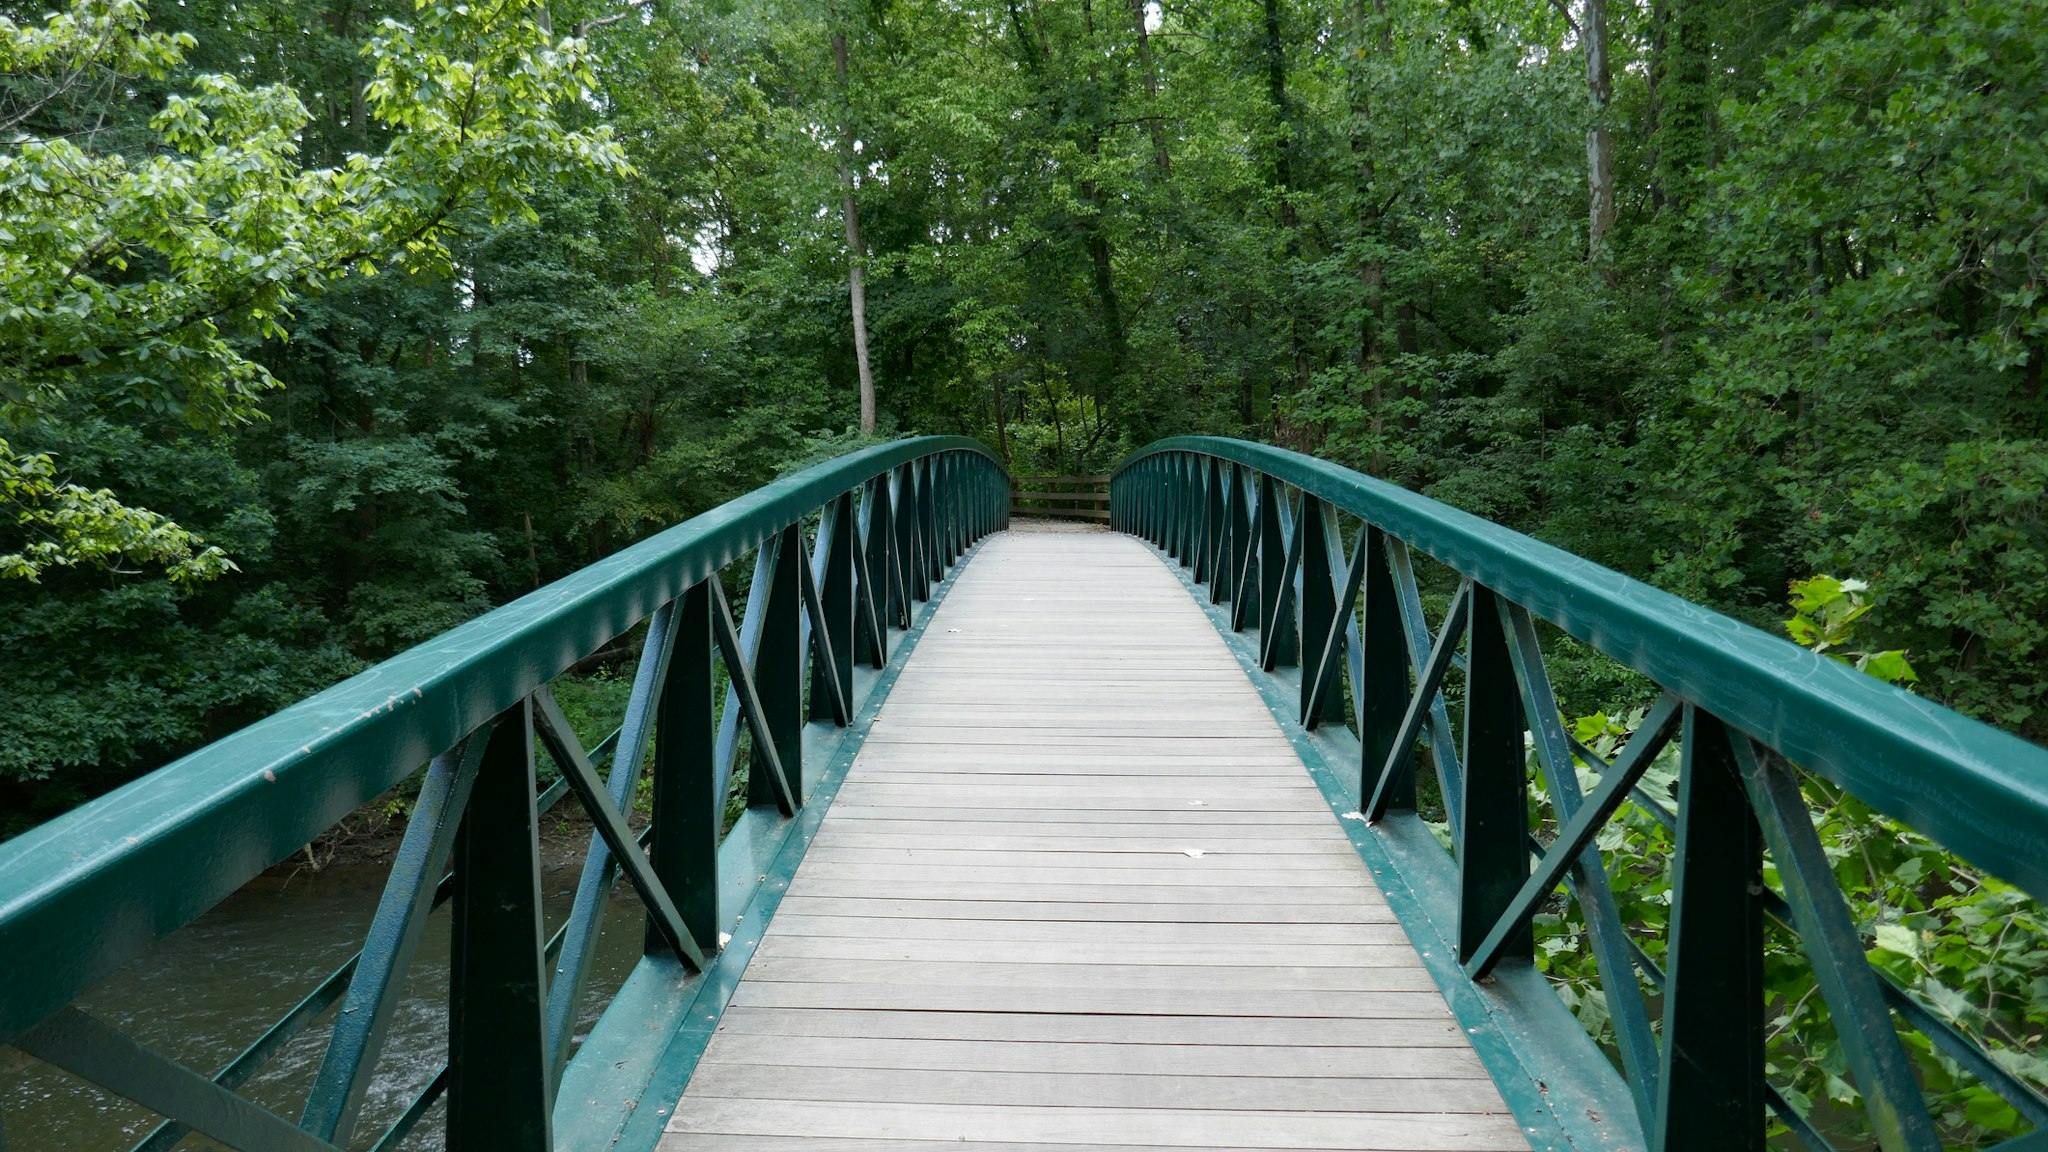 Wooden footpath bridge with metal handrails crossing creek through forest perspective - stock photo